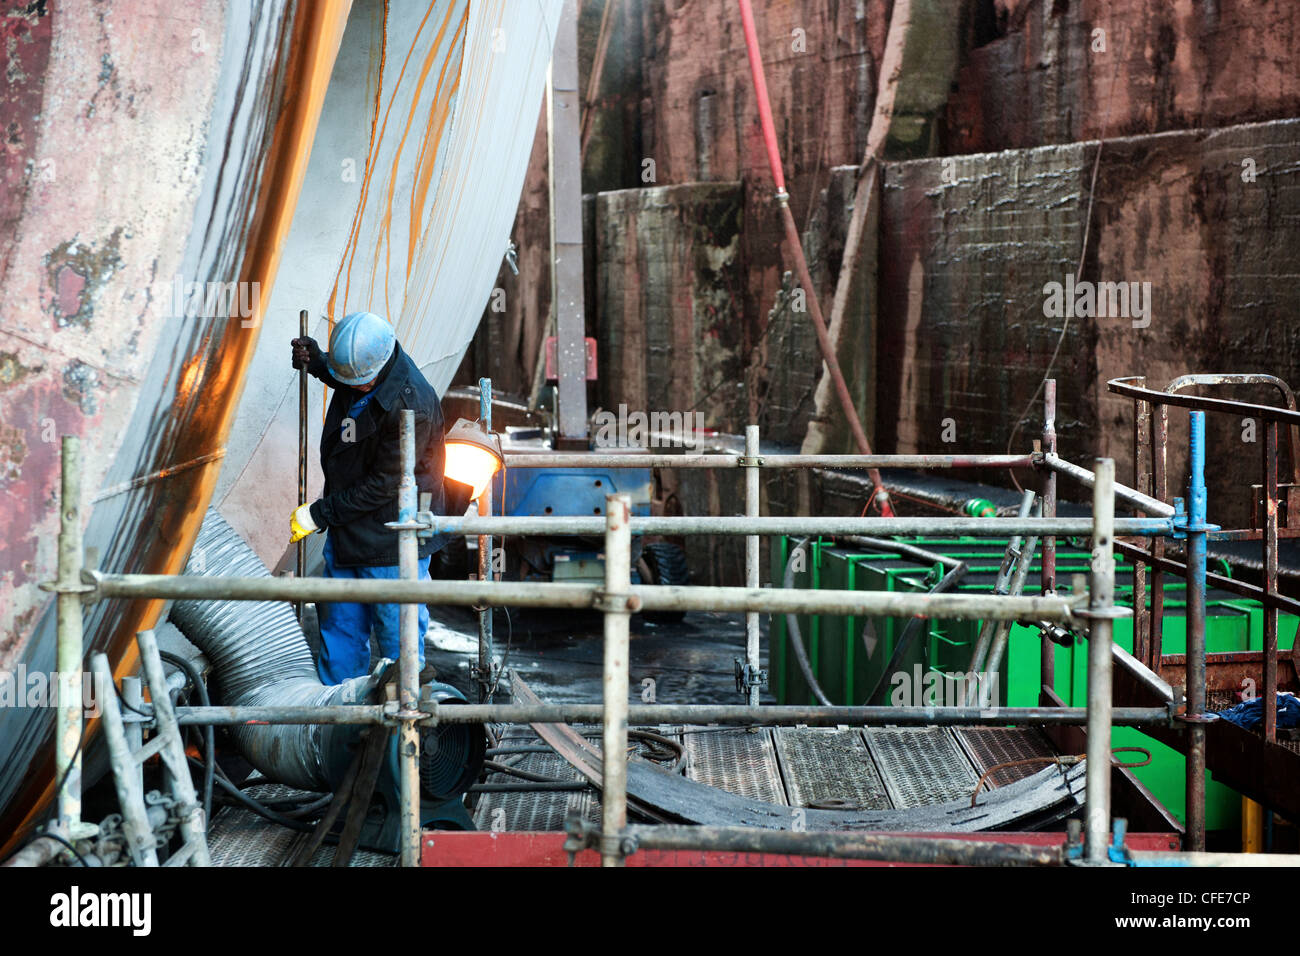 Reparation of the bow thrusters of an industrial supply vessel in a dry dock Stock Photo